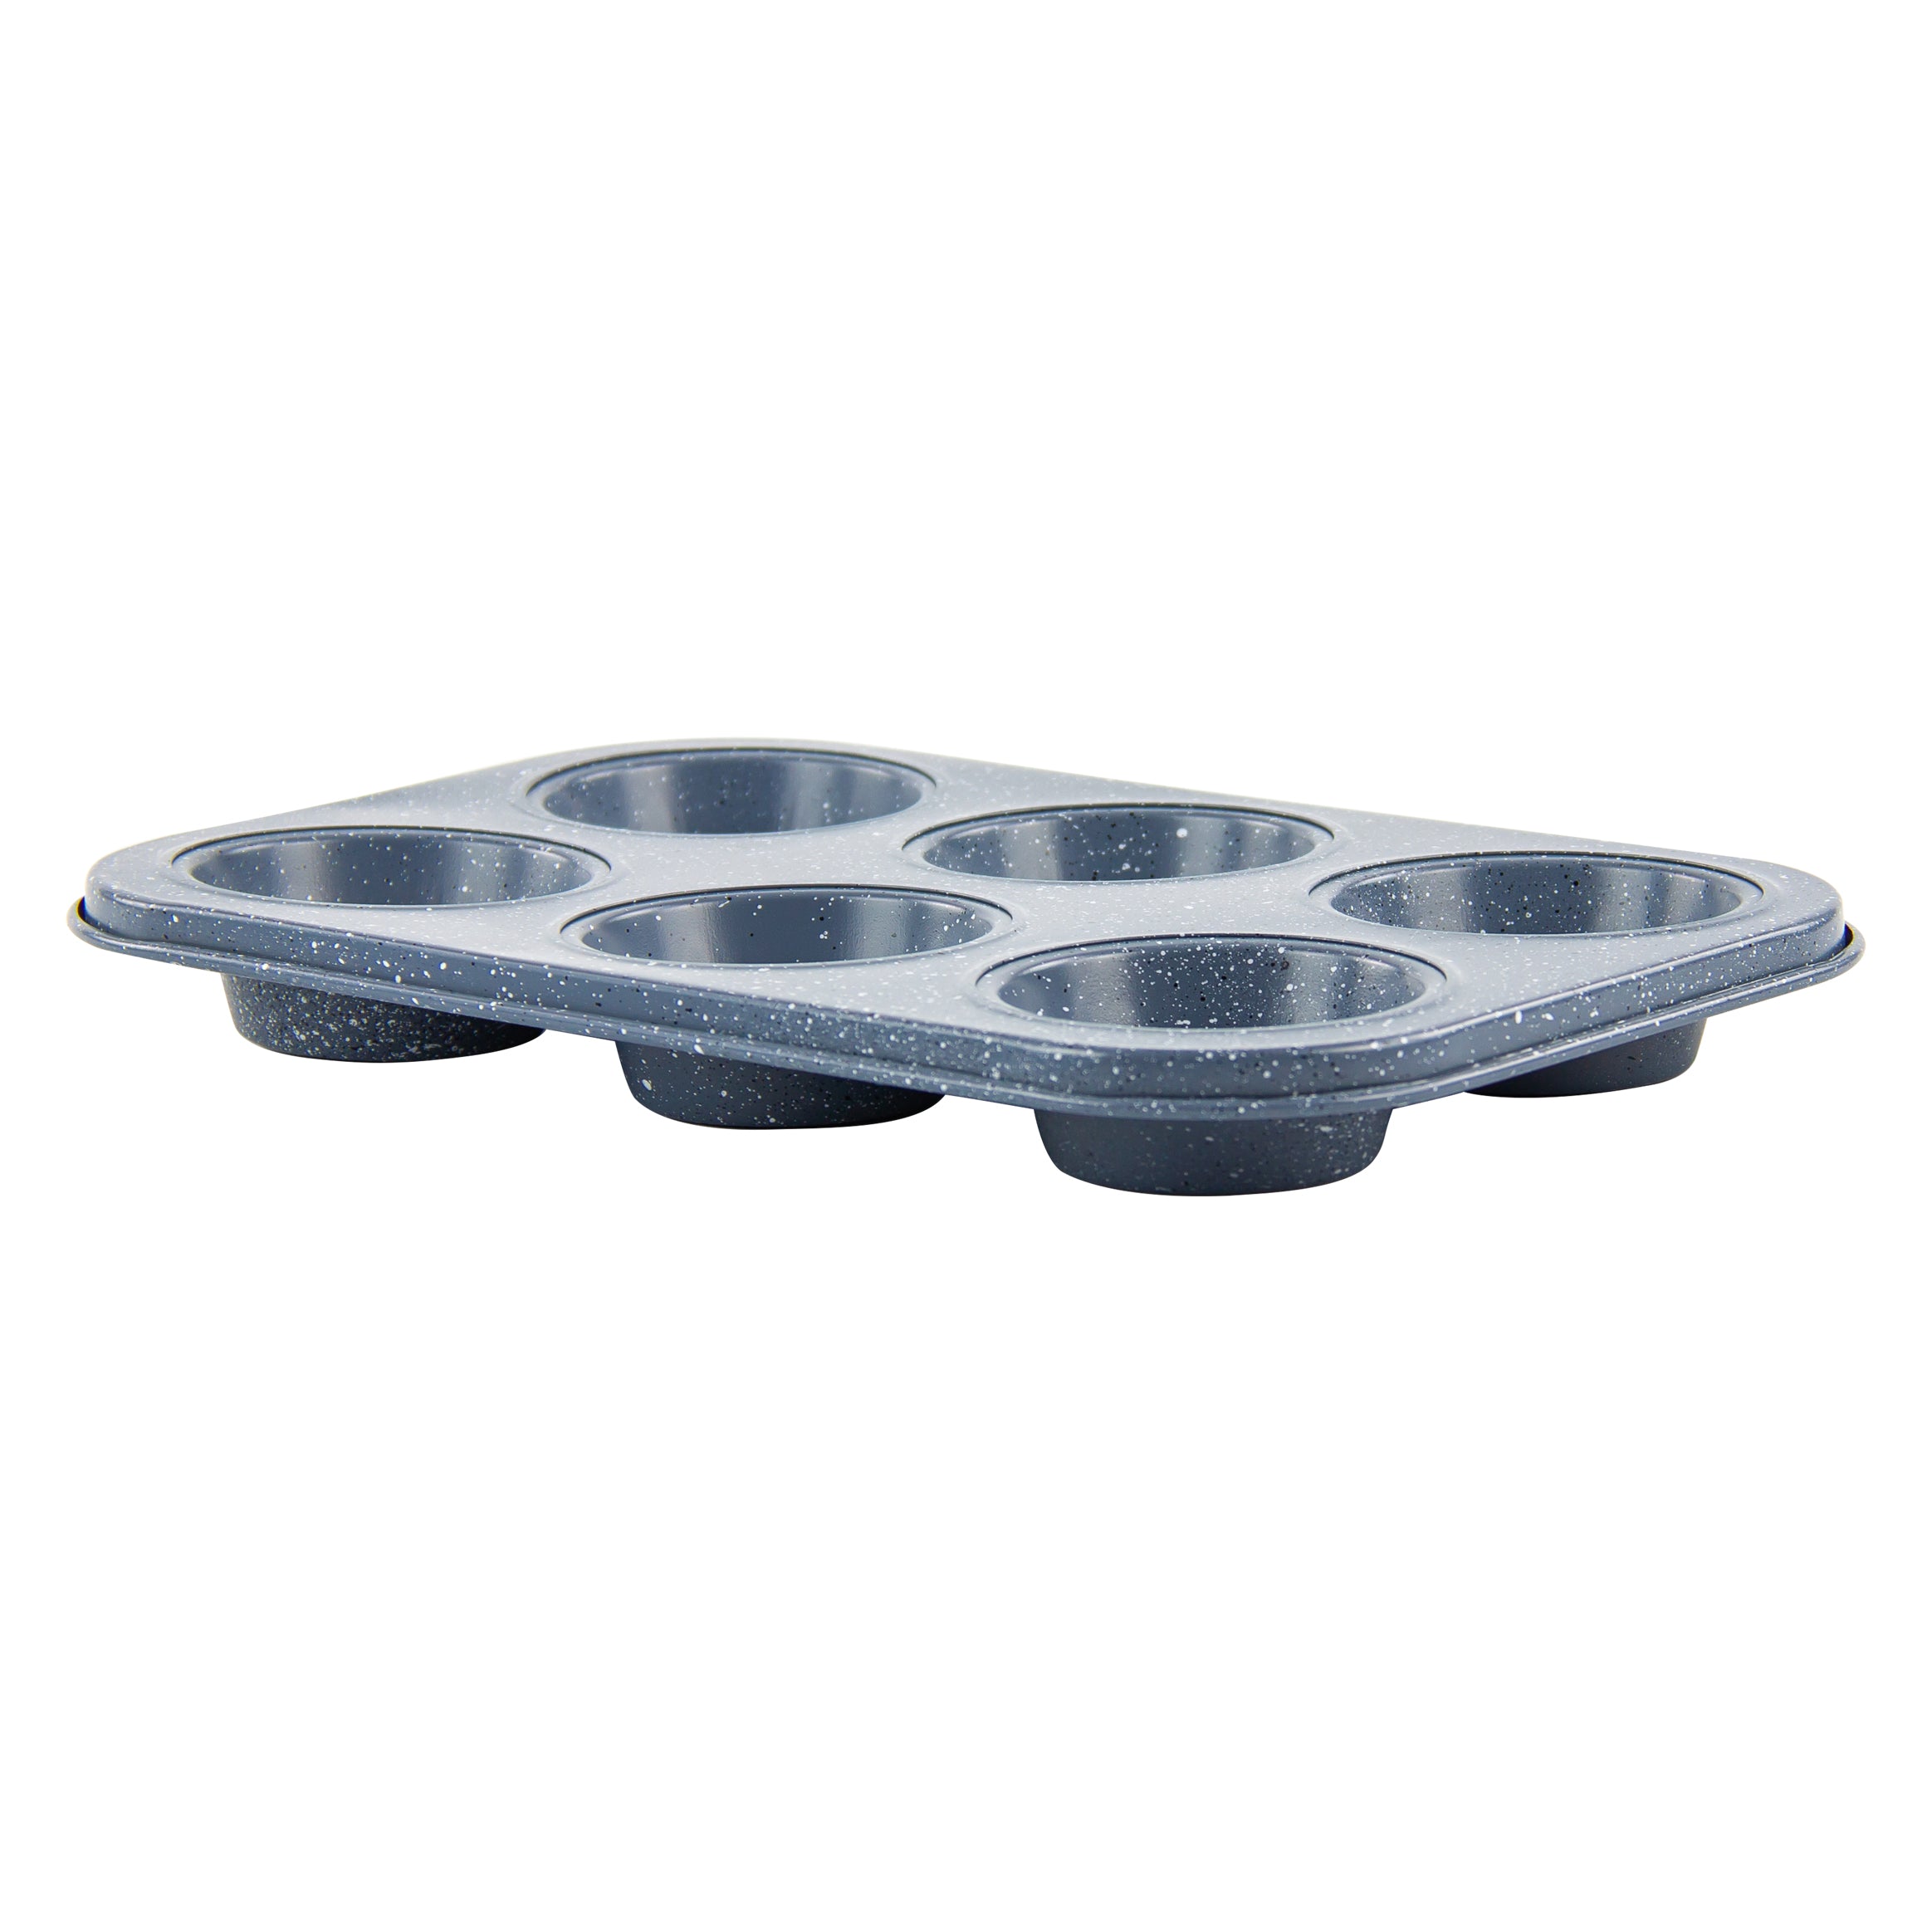 Muffin Tray - 6 Cup